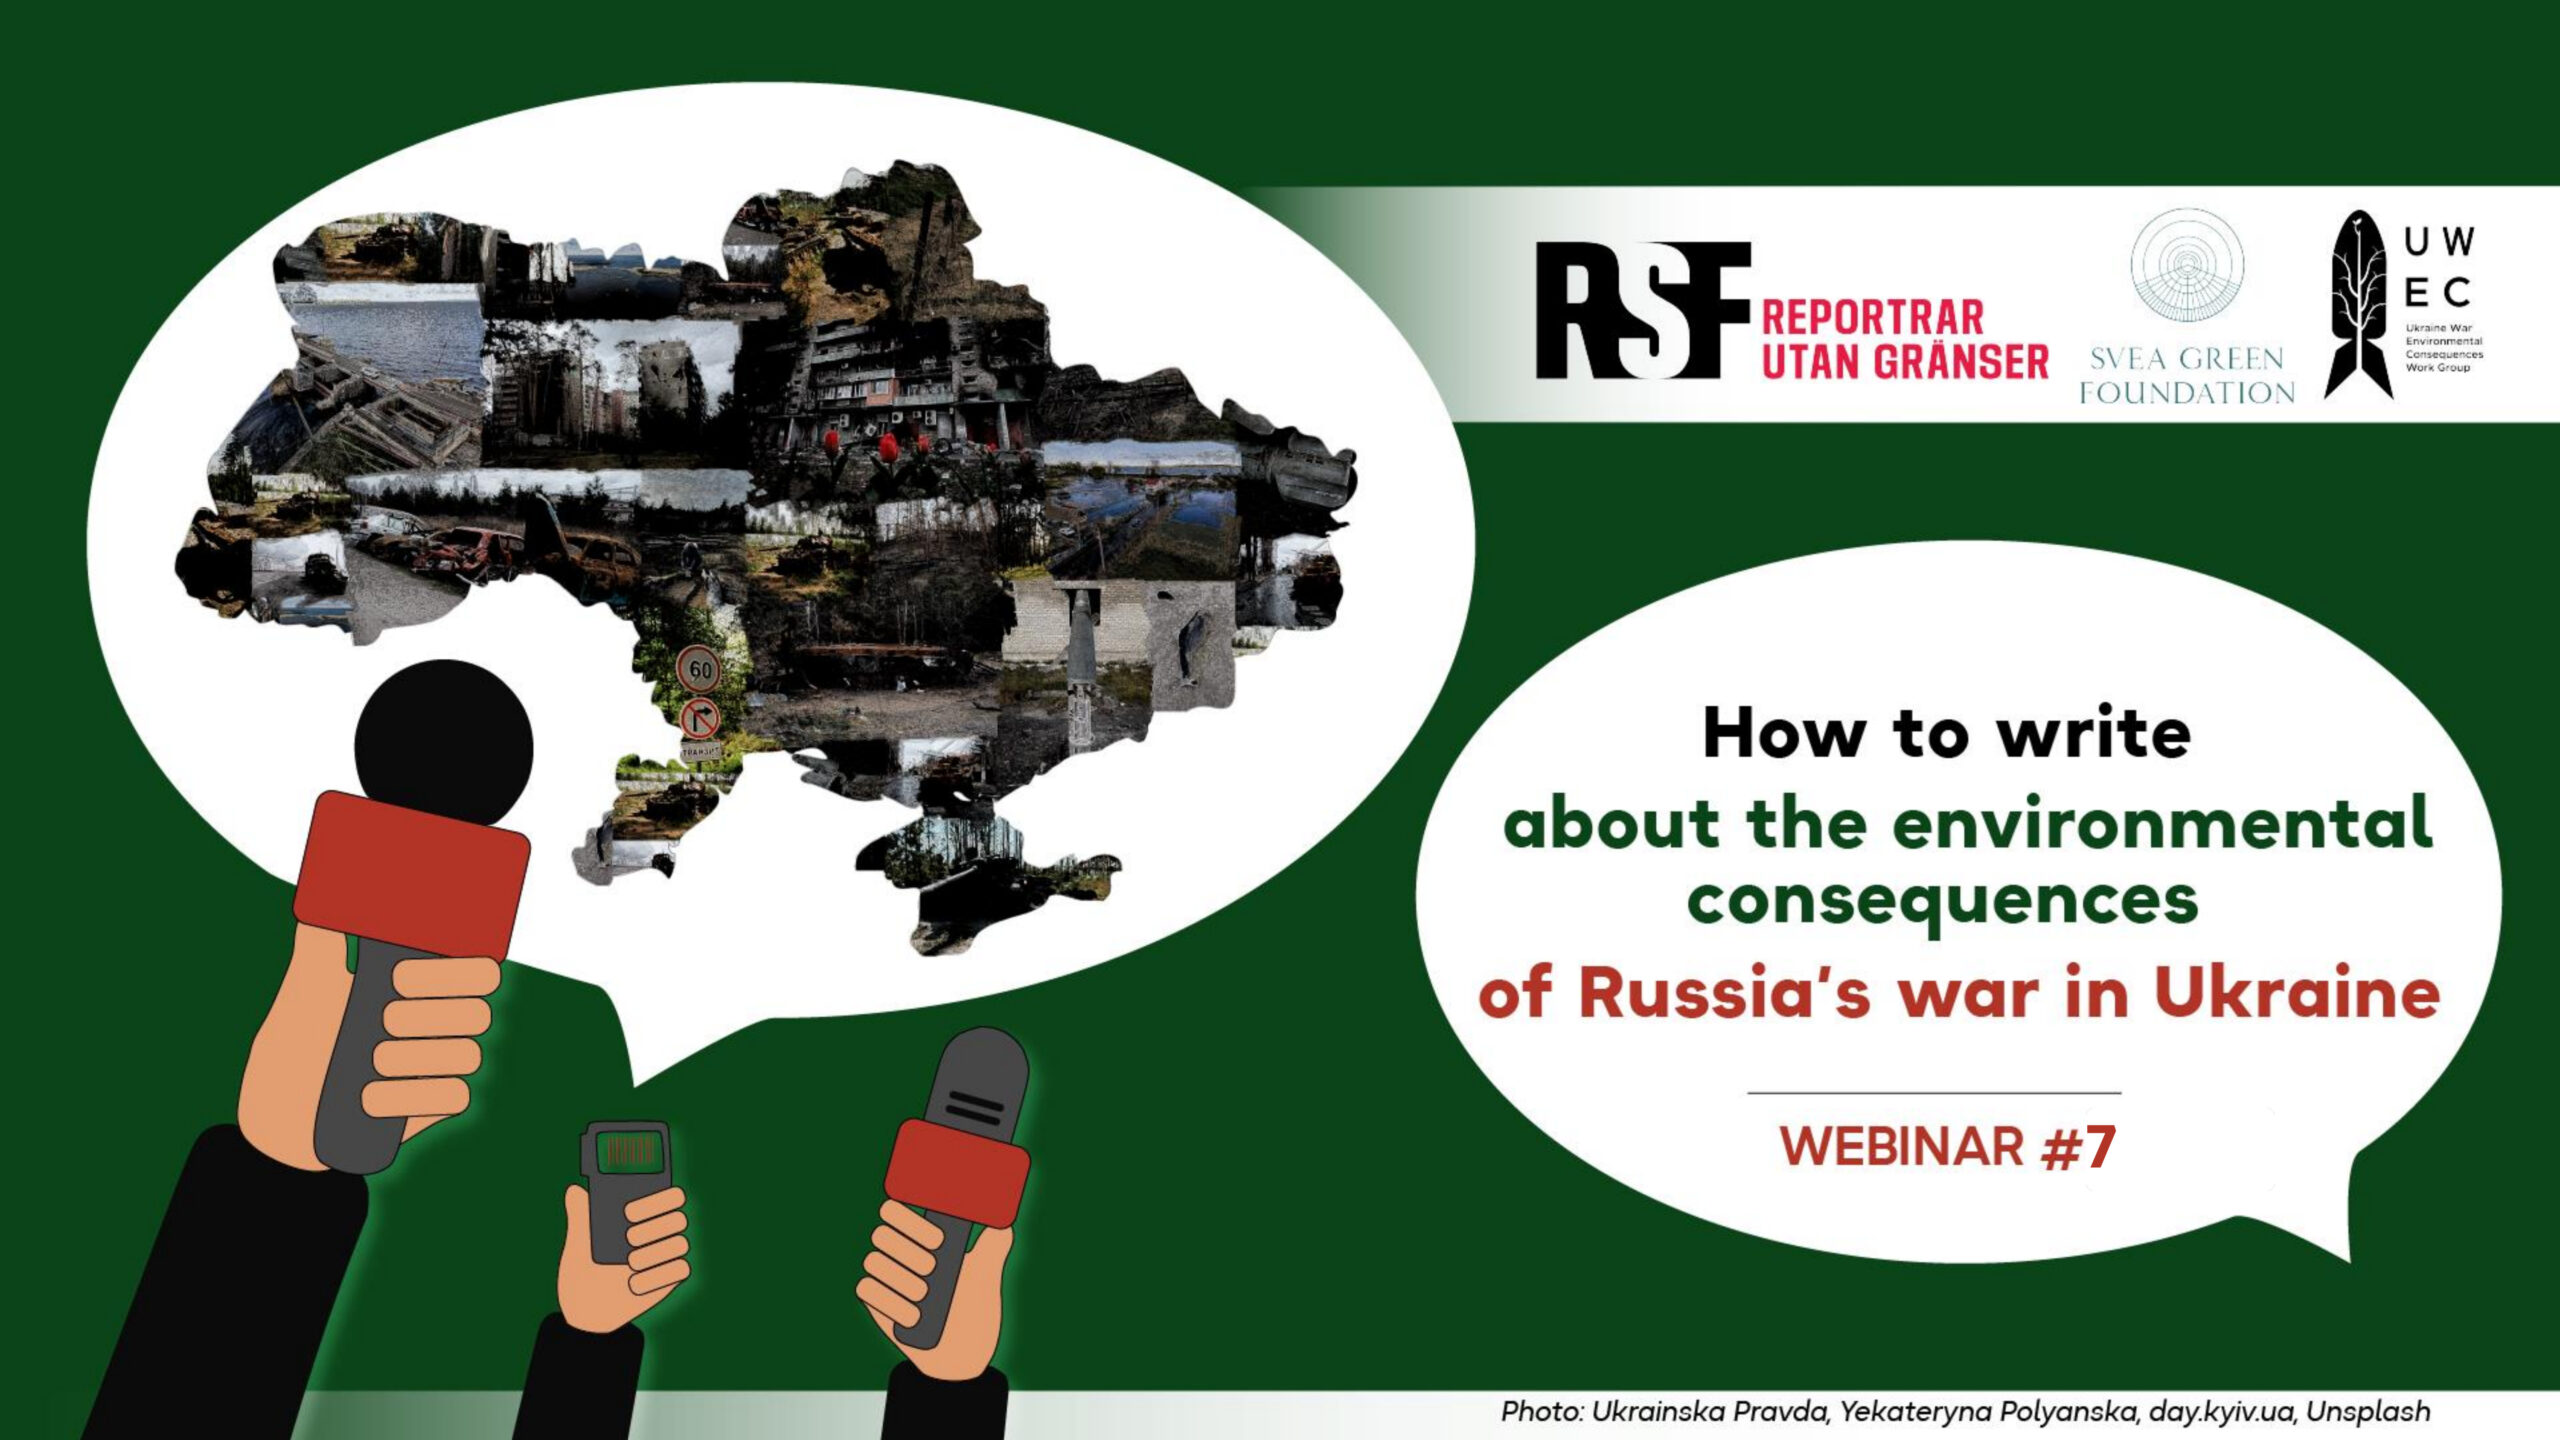 UWEC Work Group webinar: How to write about the environmental consequences of Russia’s war in Ukraine